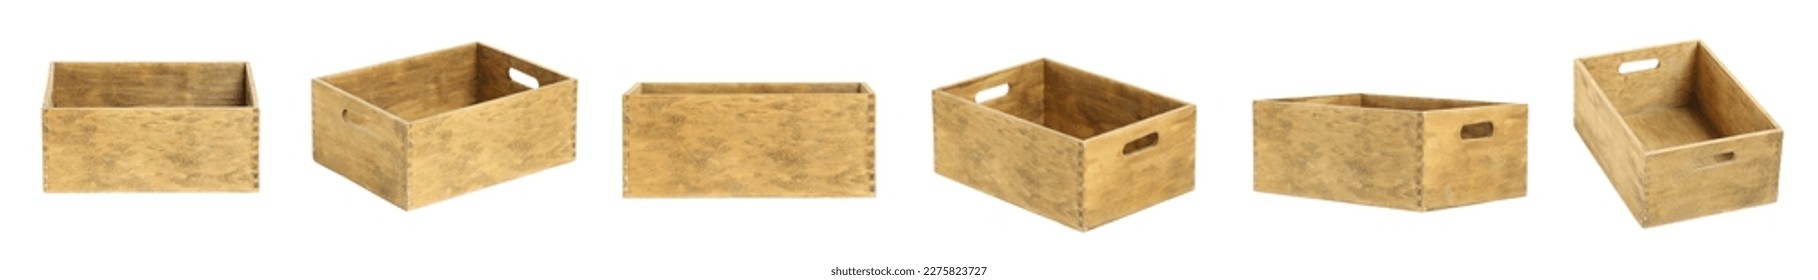 Collage of empty wooden box for tools or something else on white background, different sides